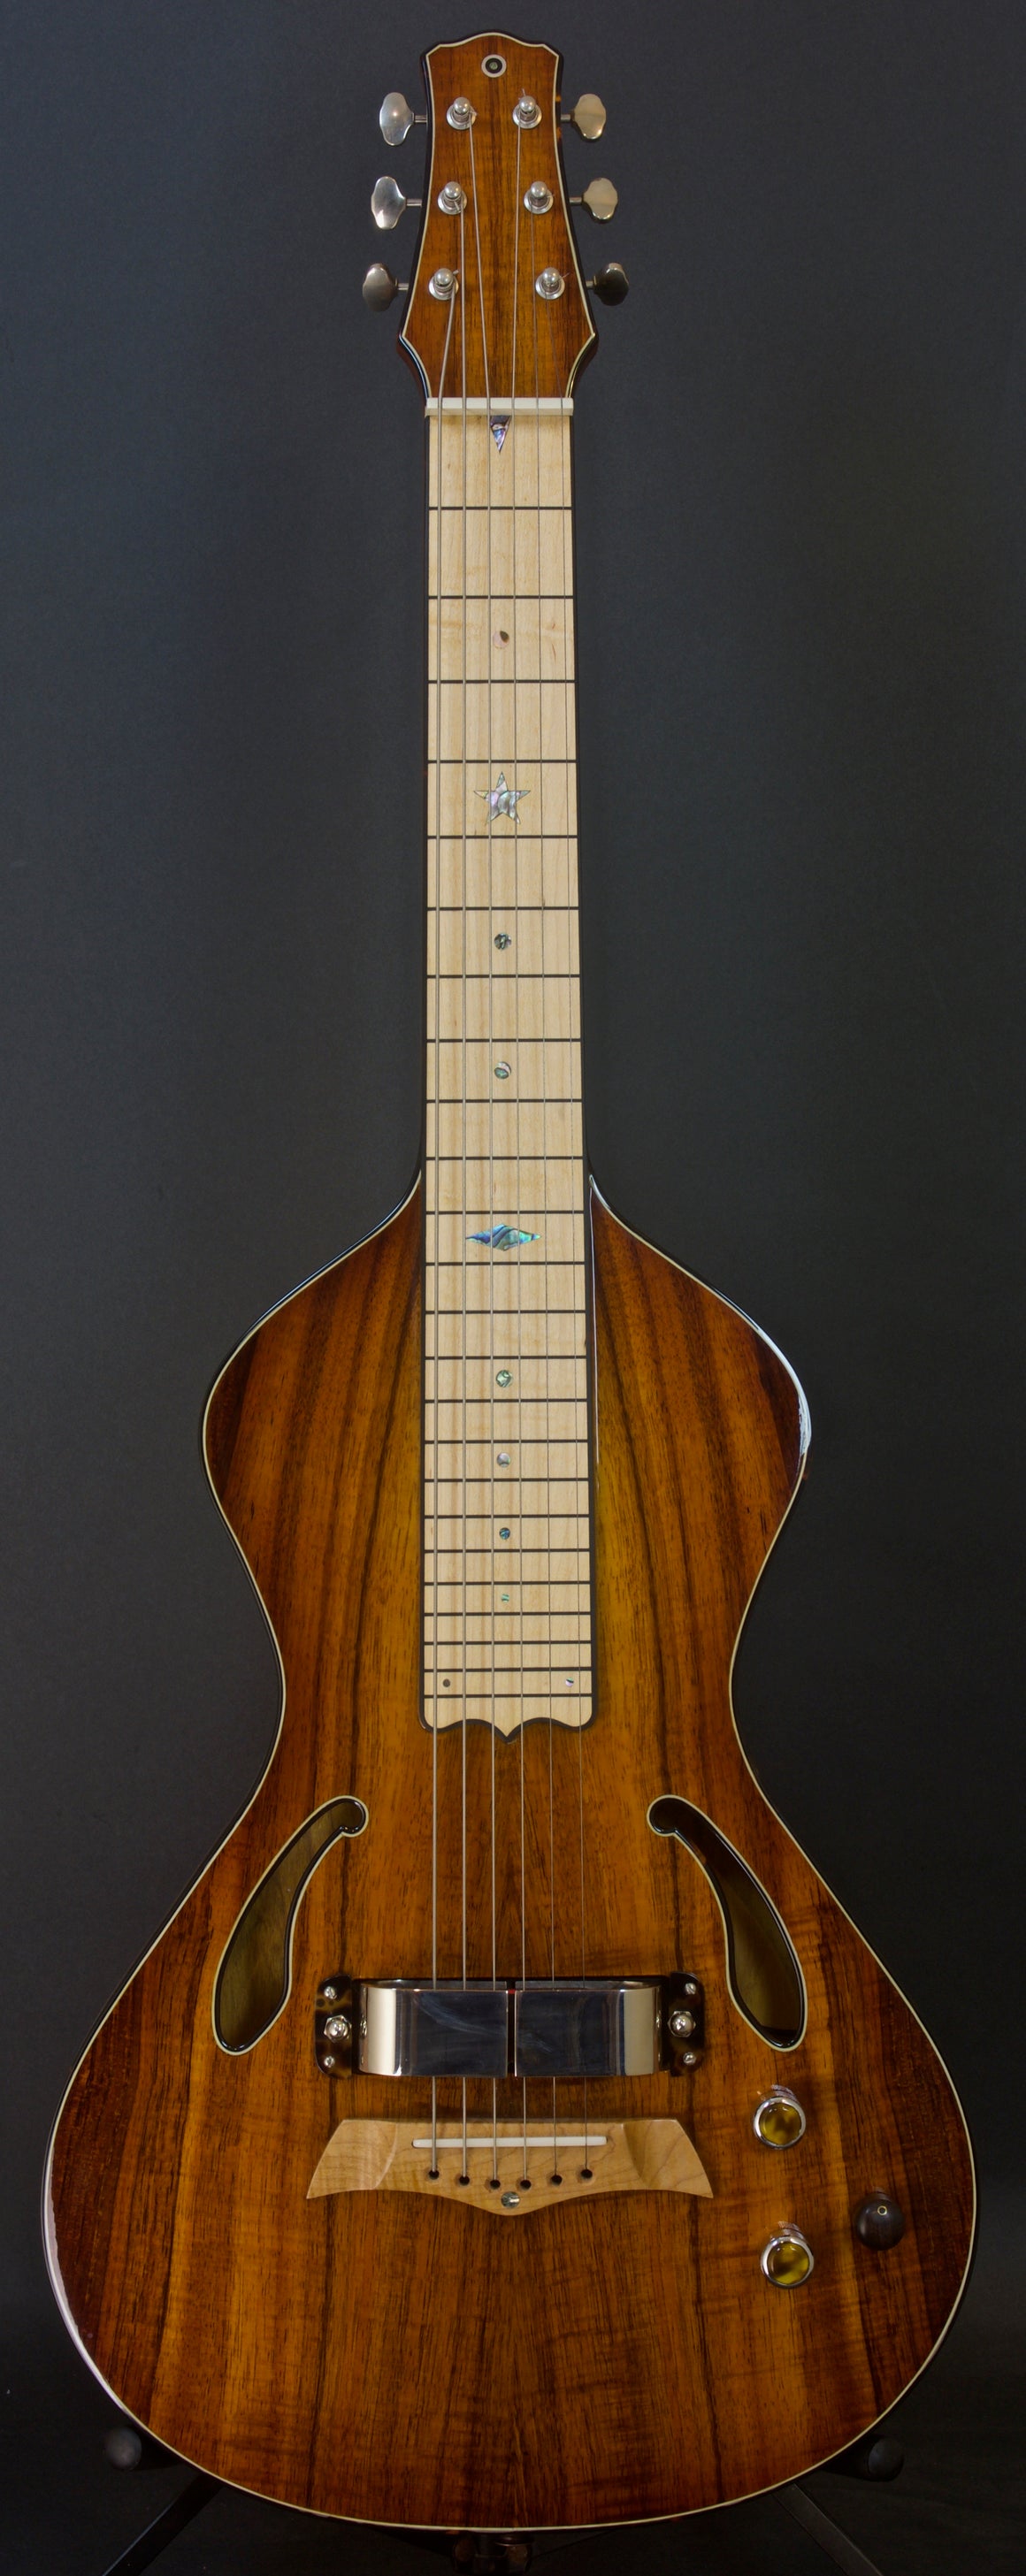 SOLD 2018 Asher Dual Tone Semi Acoustic Lap Steel Guitar with Vintage 60s Horseshoe magnet and Asher Coil, #1051